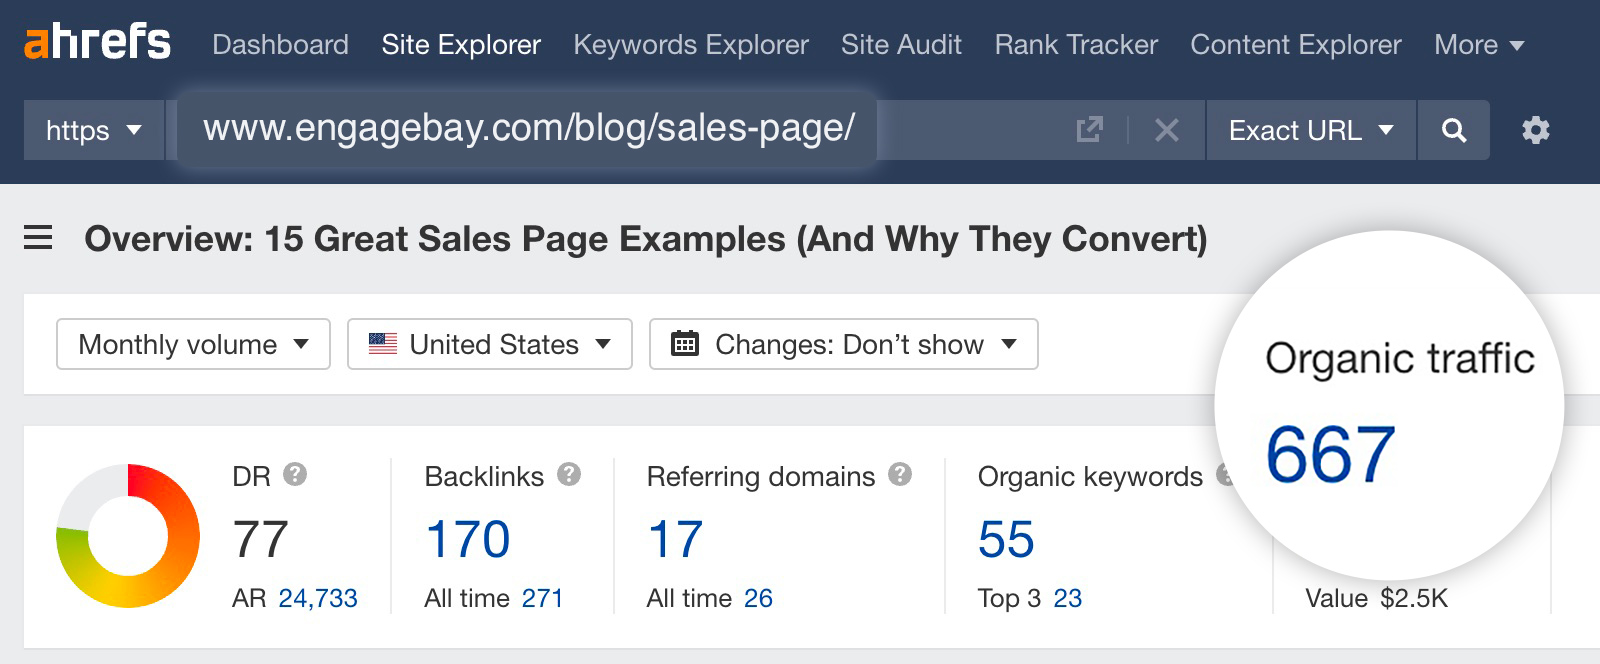 Overview of a post about sales pages, via Ahrefs' Site Explorer